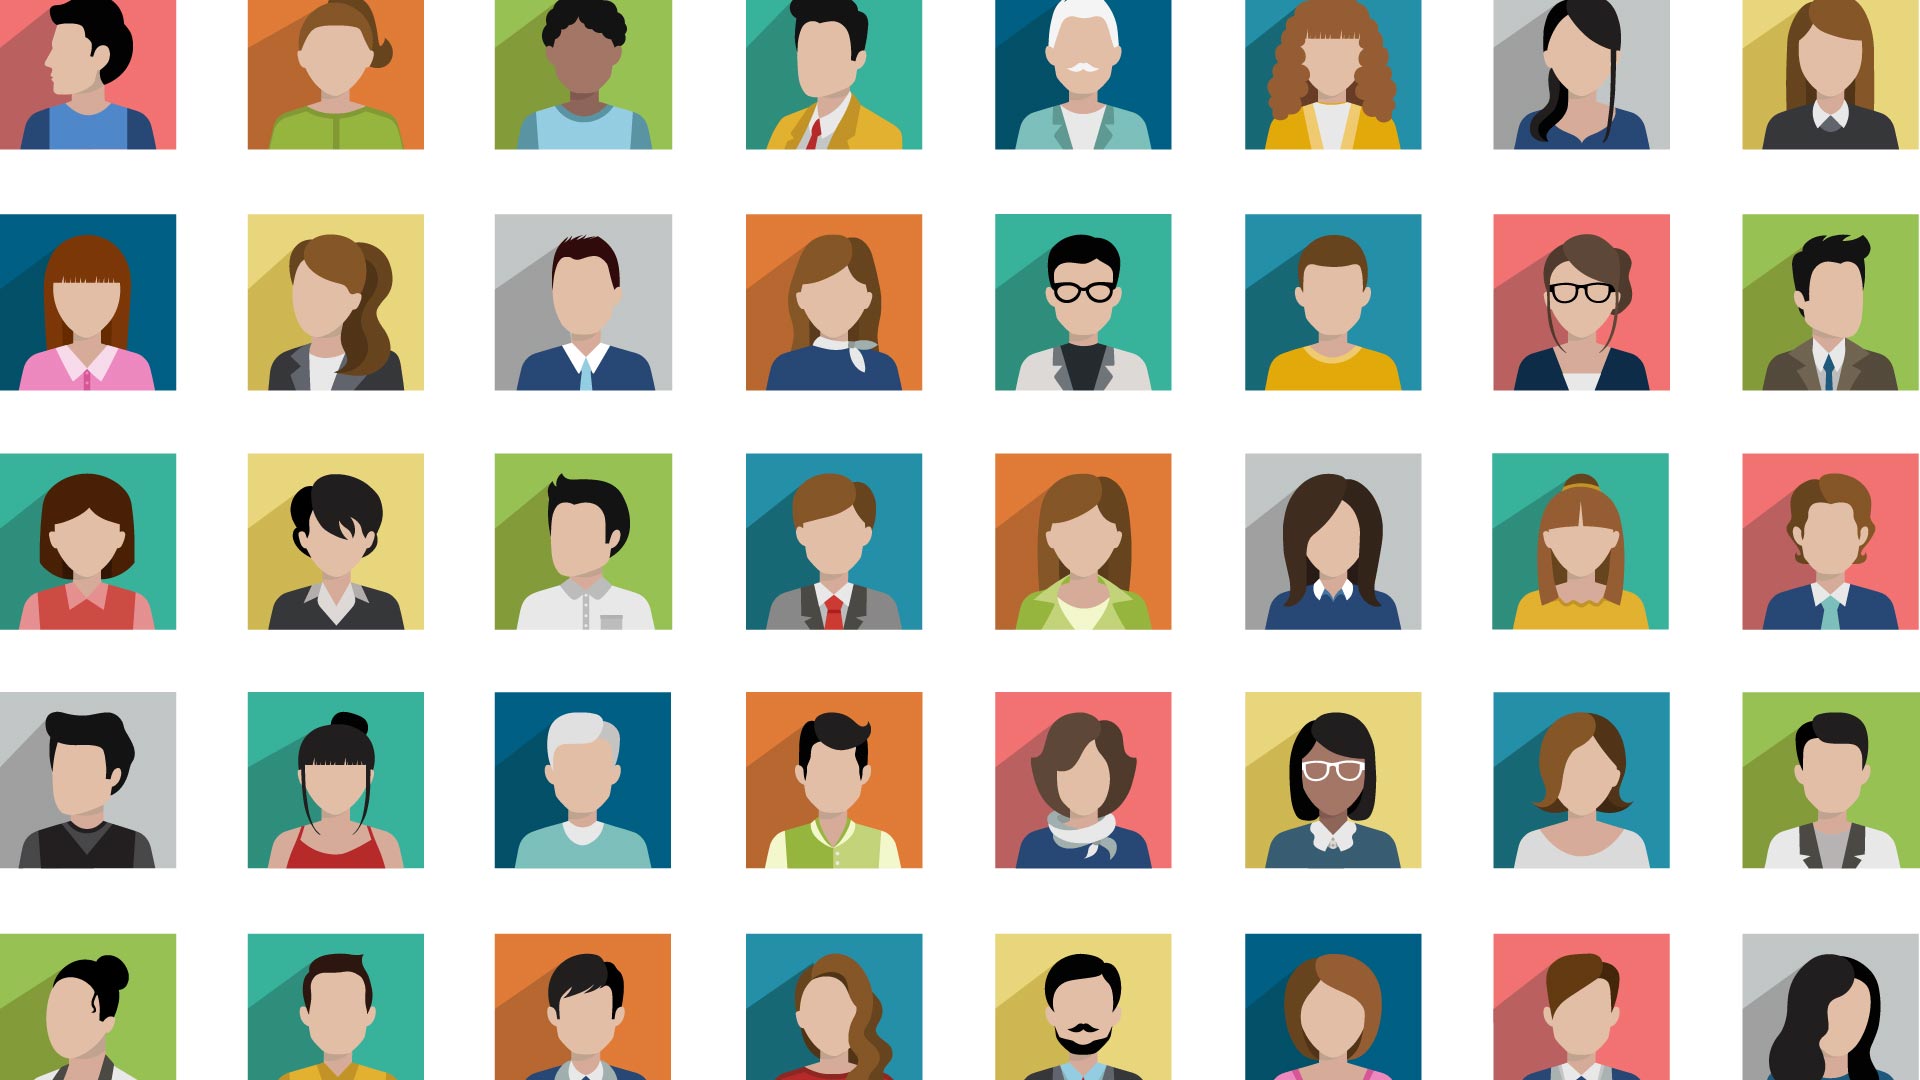 Illustrations of a diverse group of people.